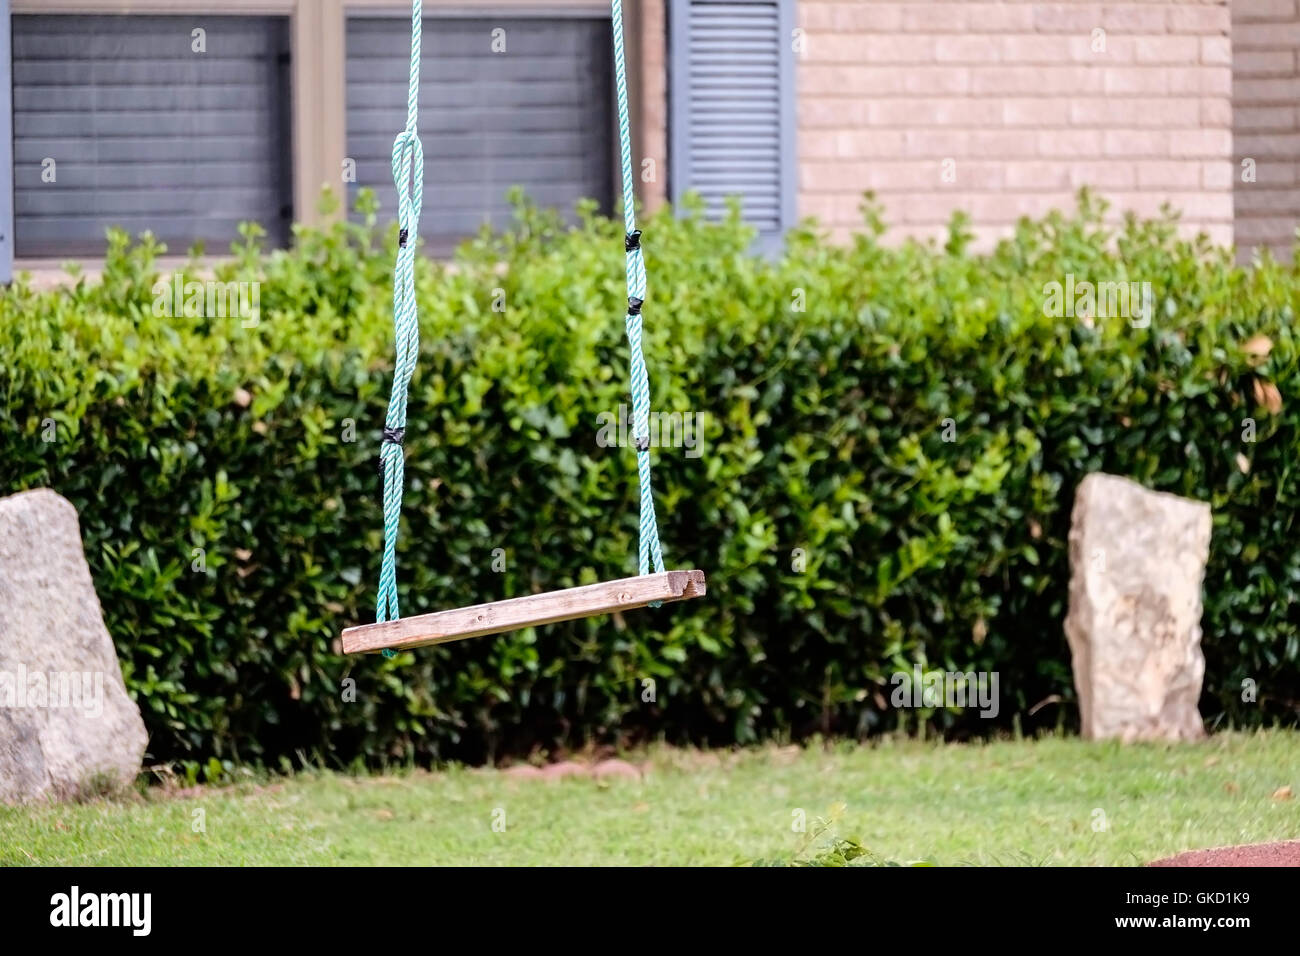 A child's rope swing hanging from a tree in a front yard of a home in Oklahoma, USA. Stock Photo